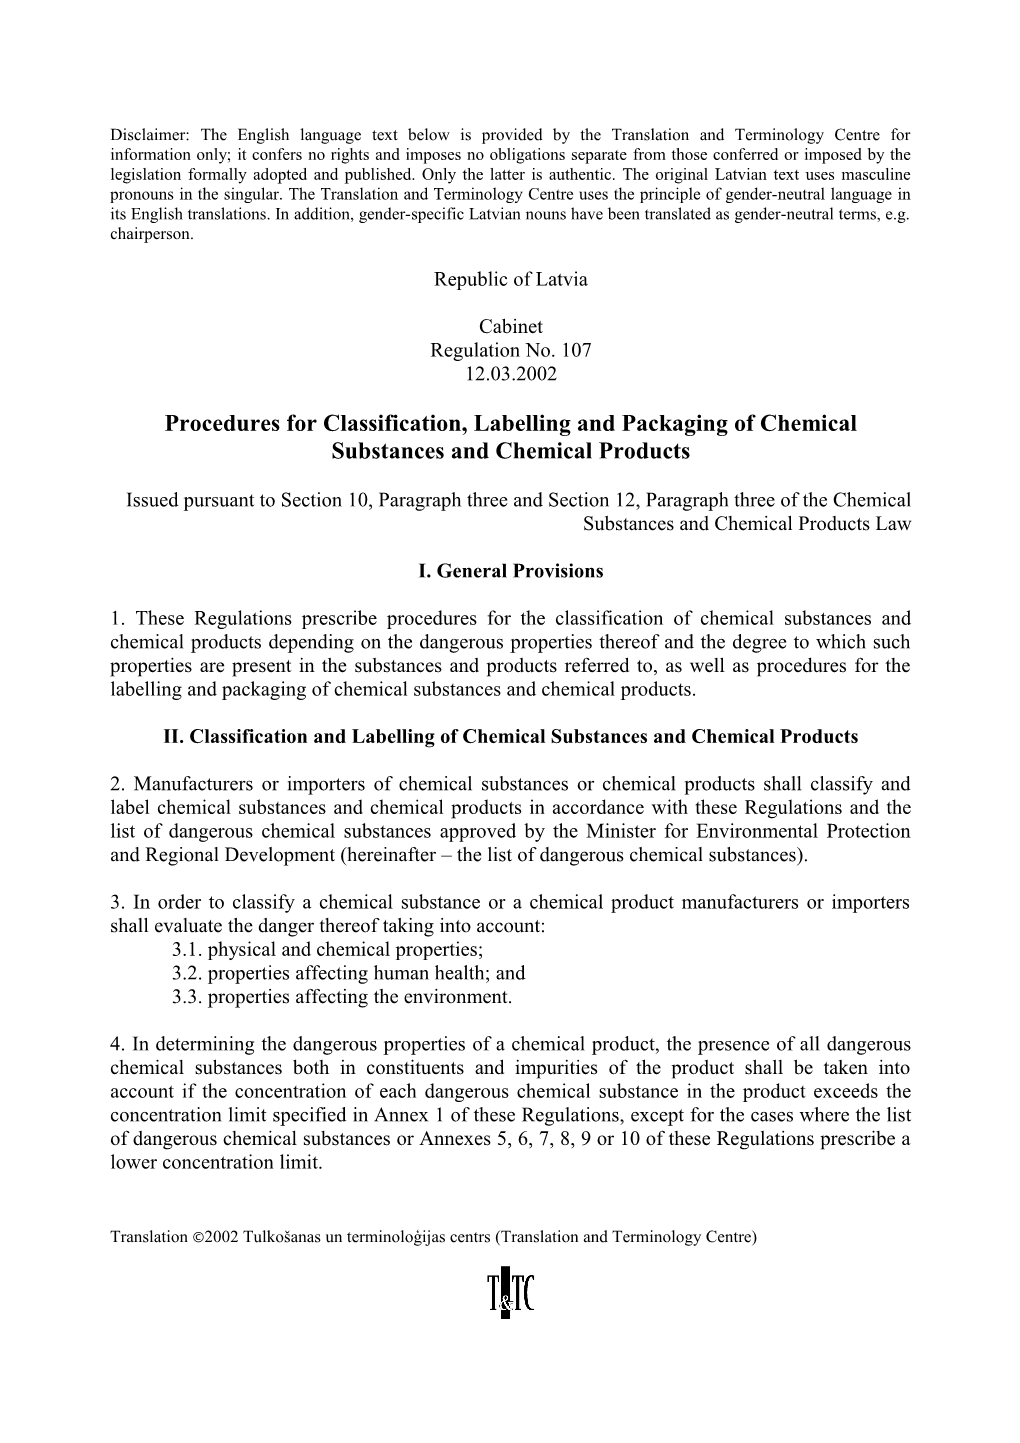 Procedures for Classification, Labelling and Packaging of Chemical Substances and Chemical